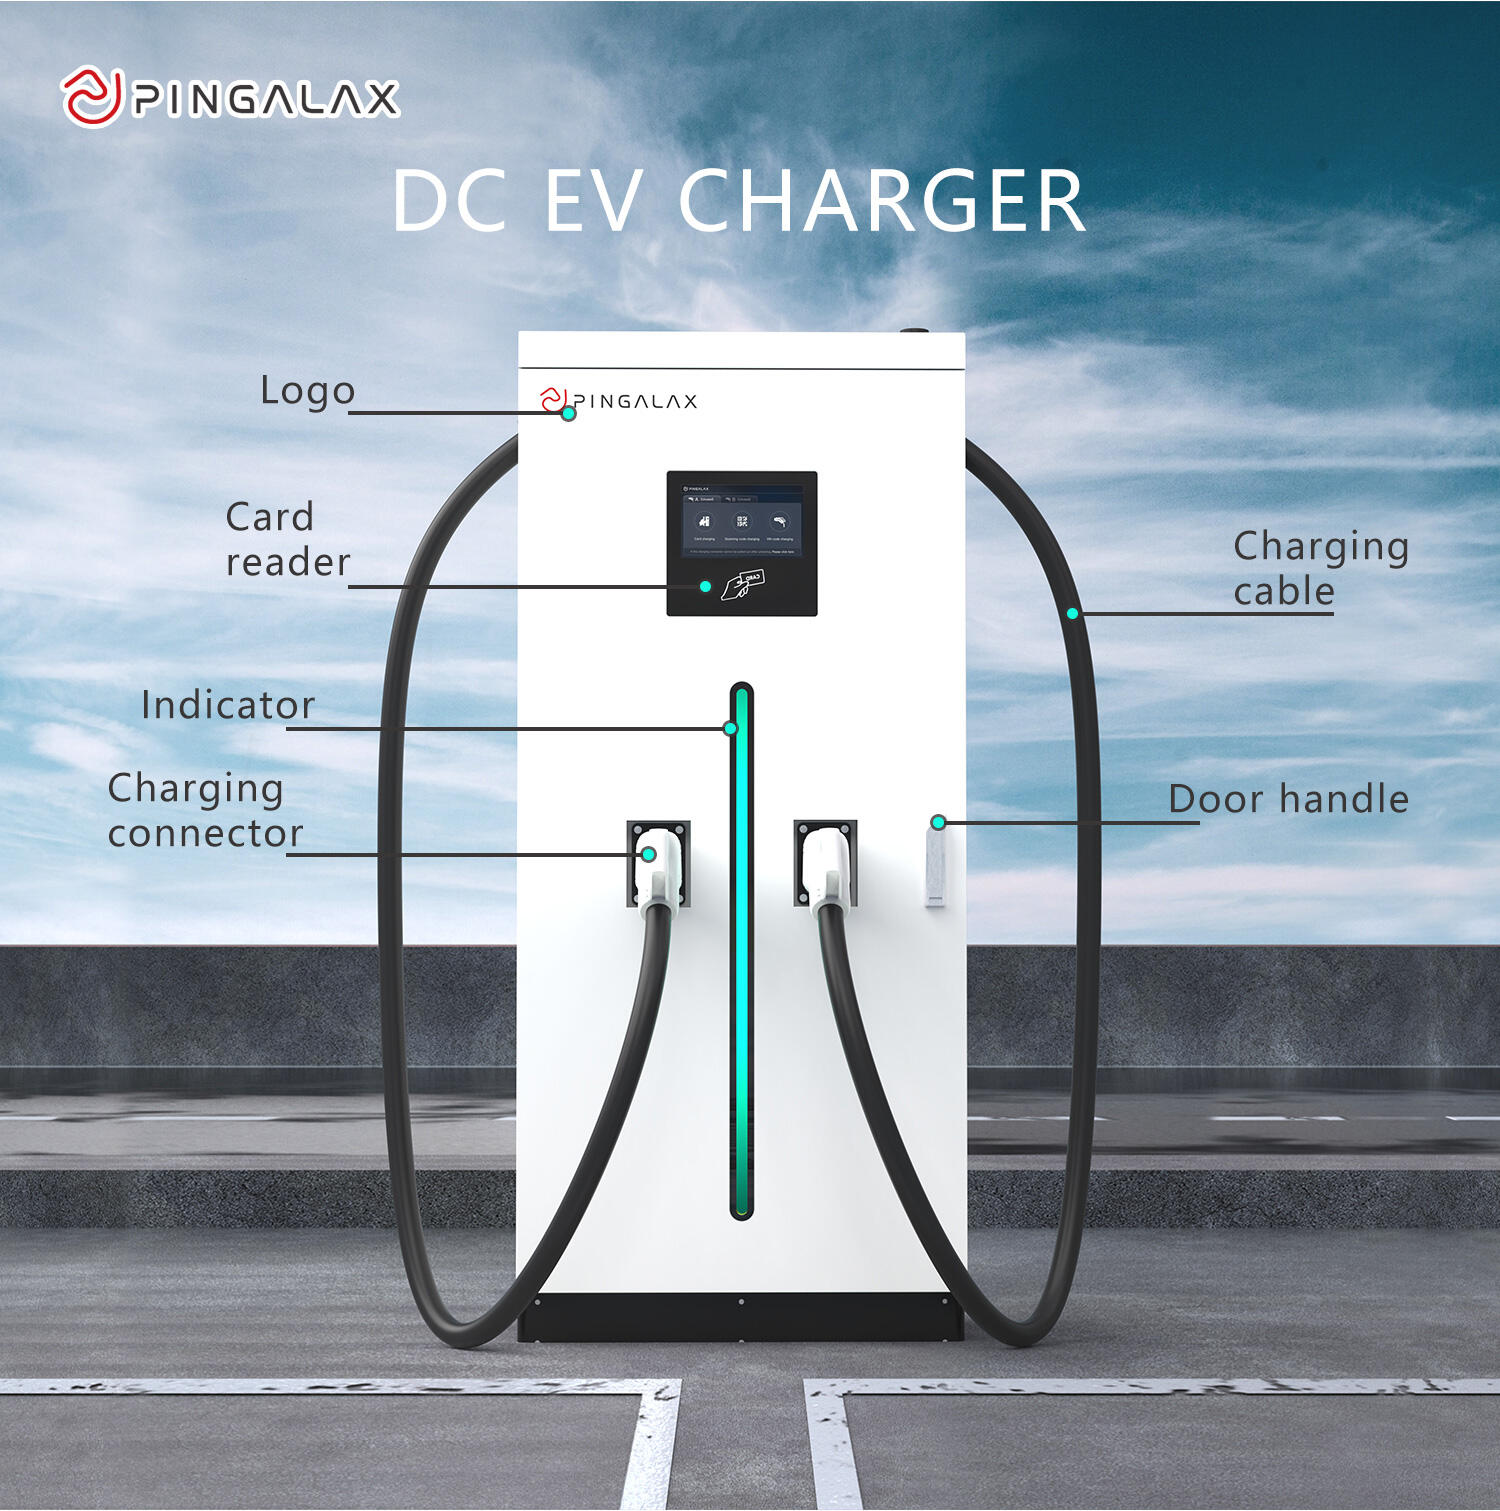 PINGALAX DC Charging Station YZ5 120KW 160KW 200KW 240KW details